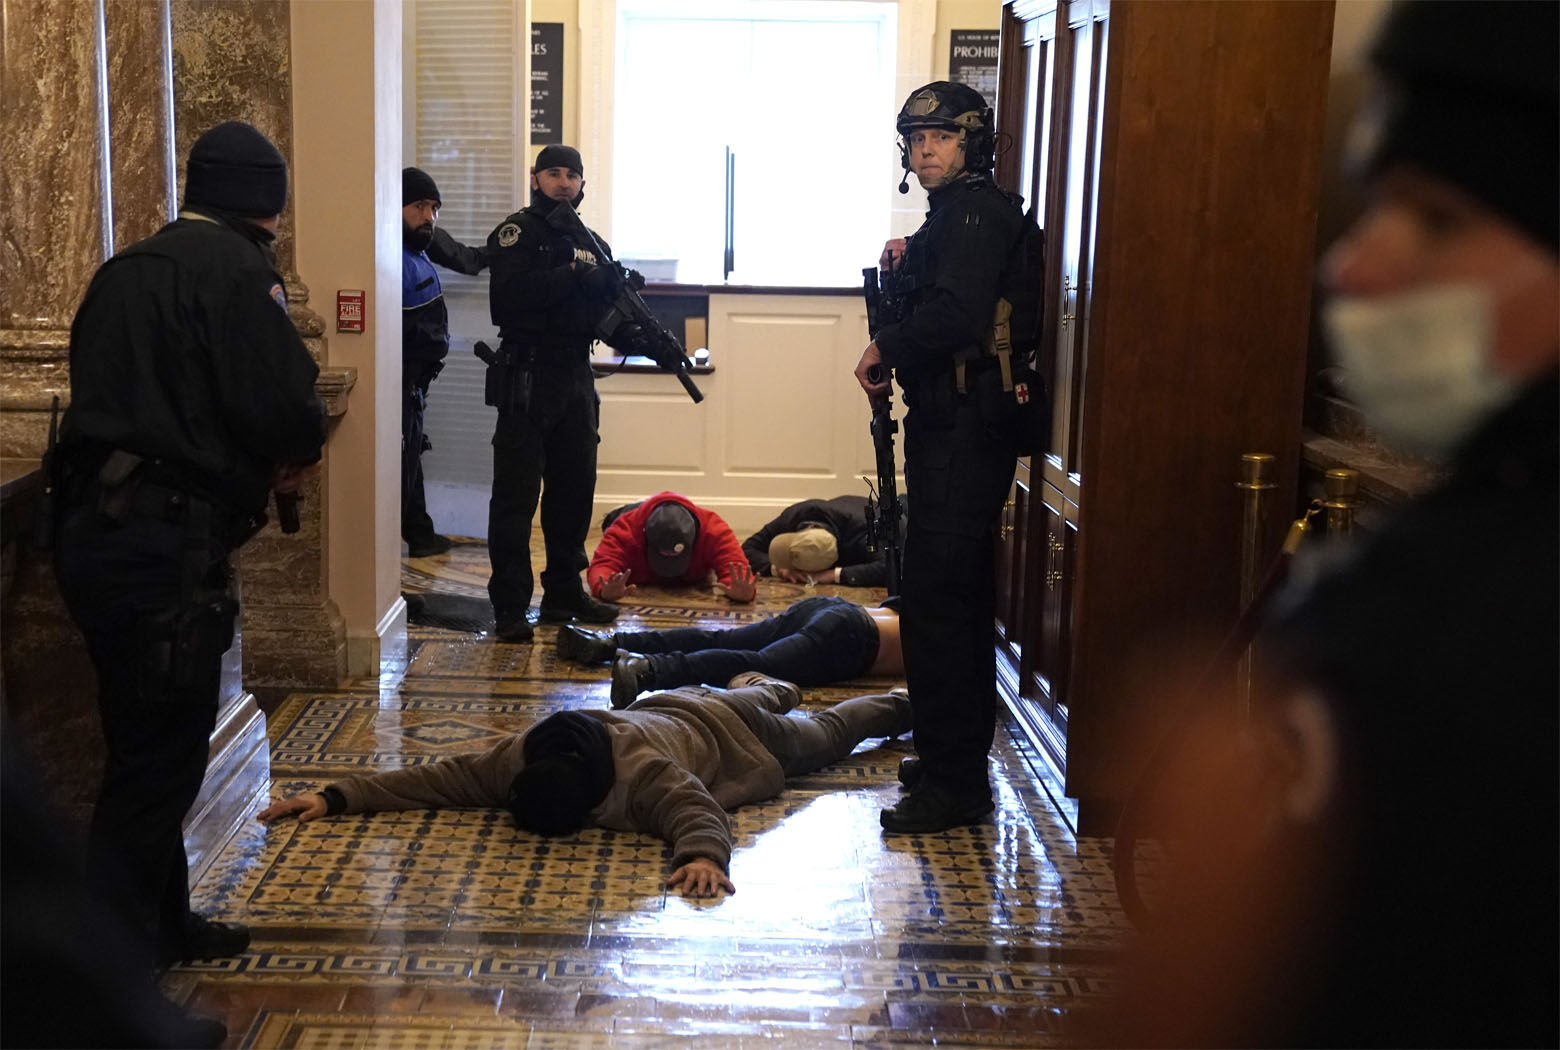 WASHINGTON, DC - JANUARY 06: U.S. Capitol Police stand detain protesters outside of the House Chamber during a joint session of Congress on January 06, 2021 in Washington, DC. Congress held a joint session today to ratify President-elect Joe Biden's 306-232 Electoral College win over President Donald Trump. A group of Republican senators said they would reject the Electoral College votes of several states unless Congress appointed a commission to audit the election results. (Photo by Drew Angerer/Getty Images)